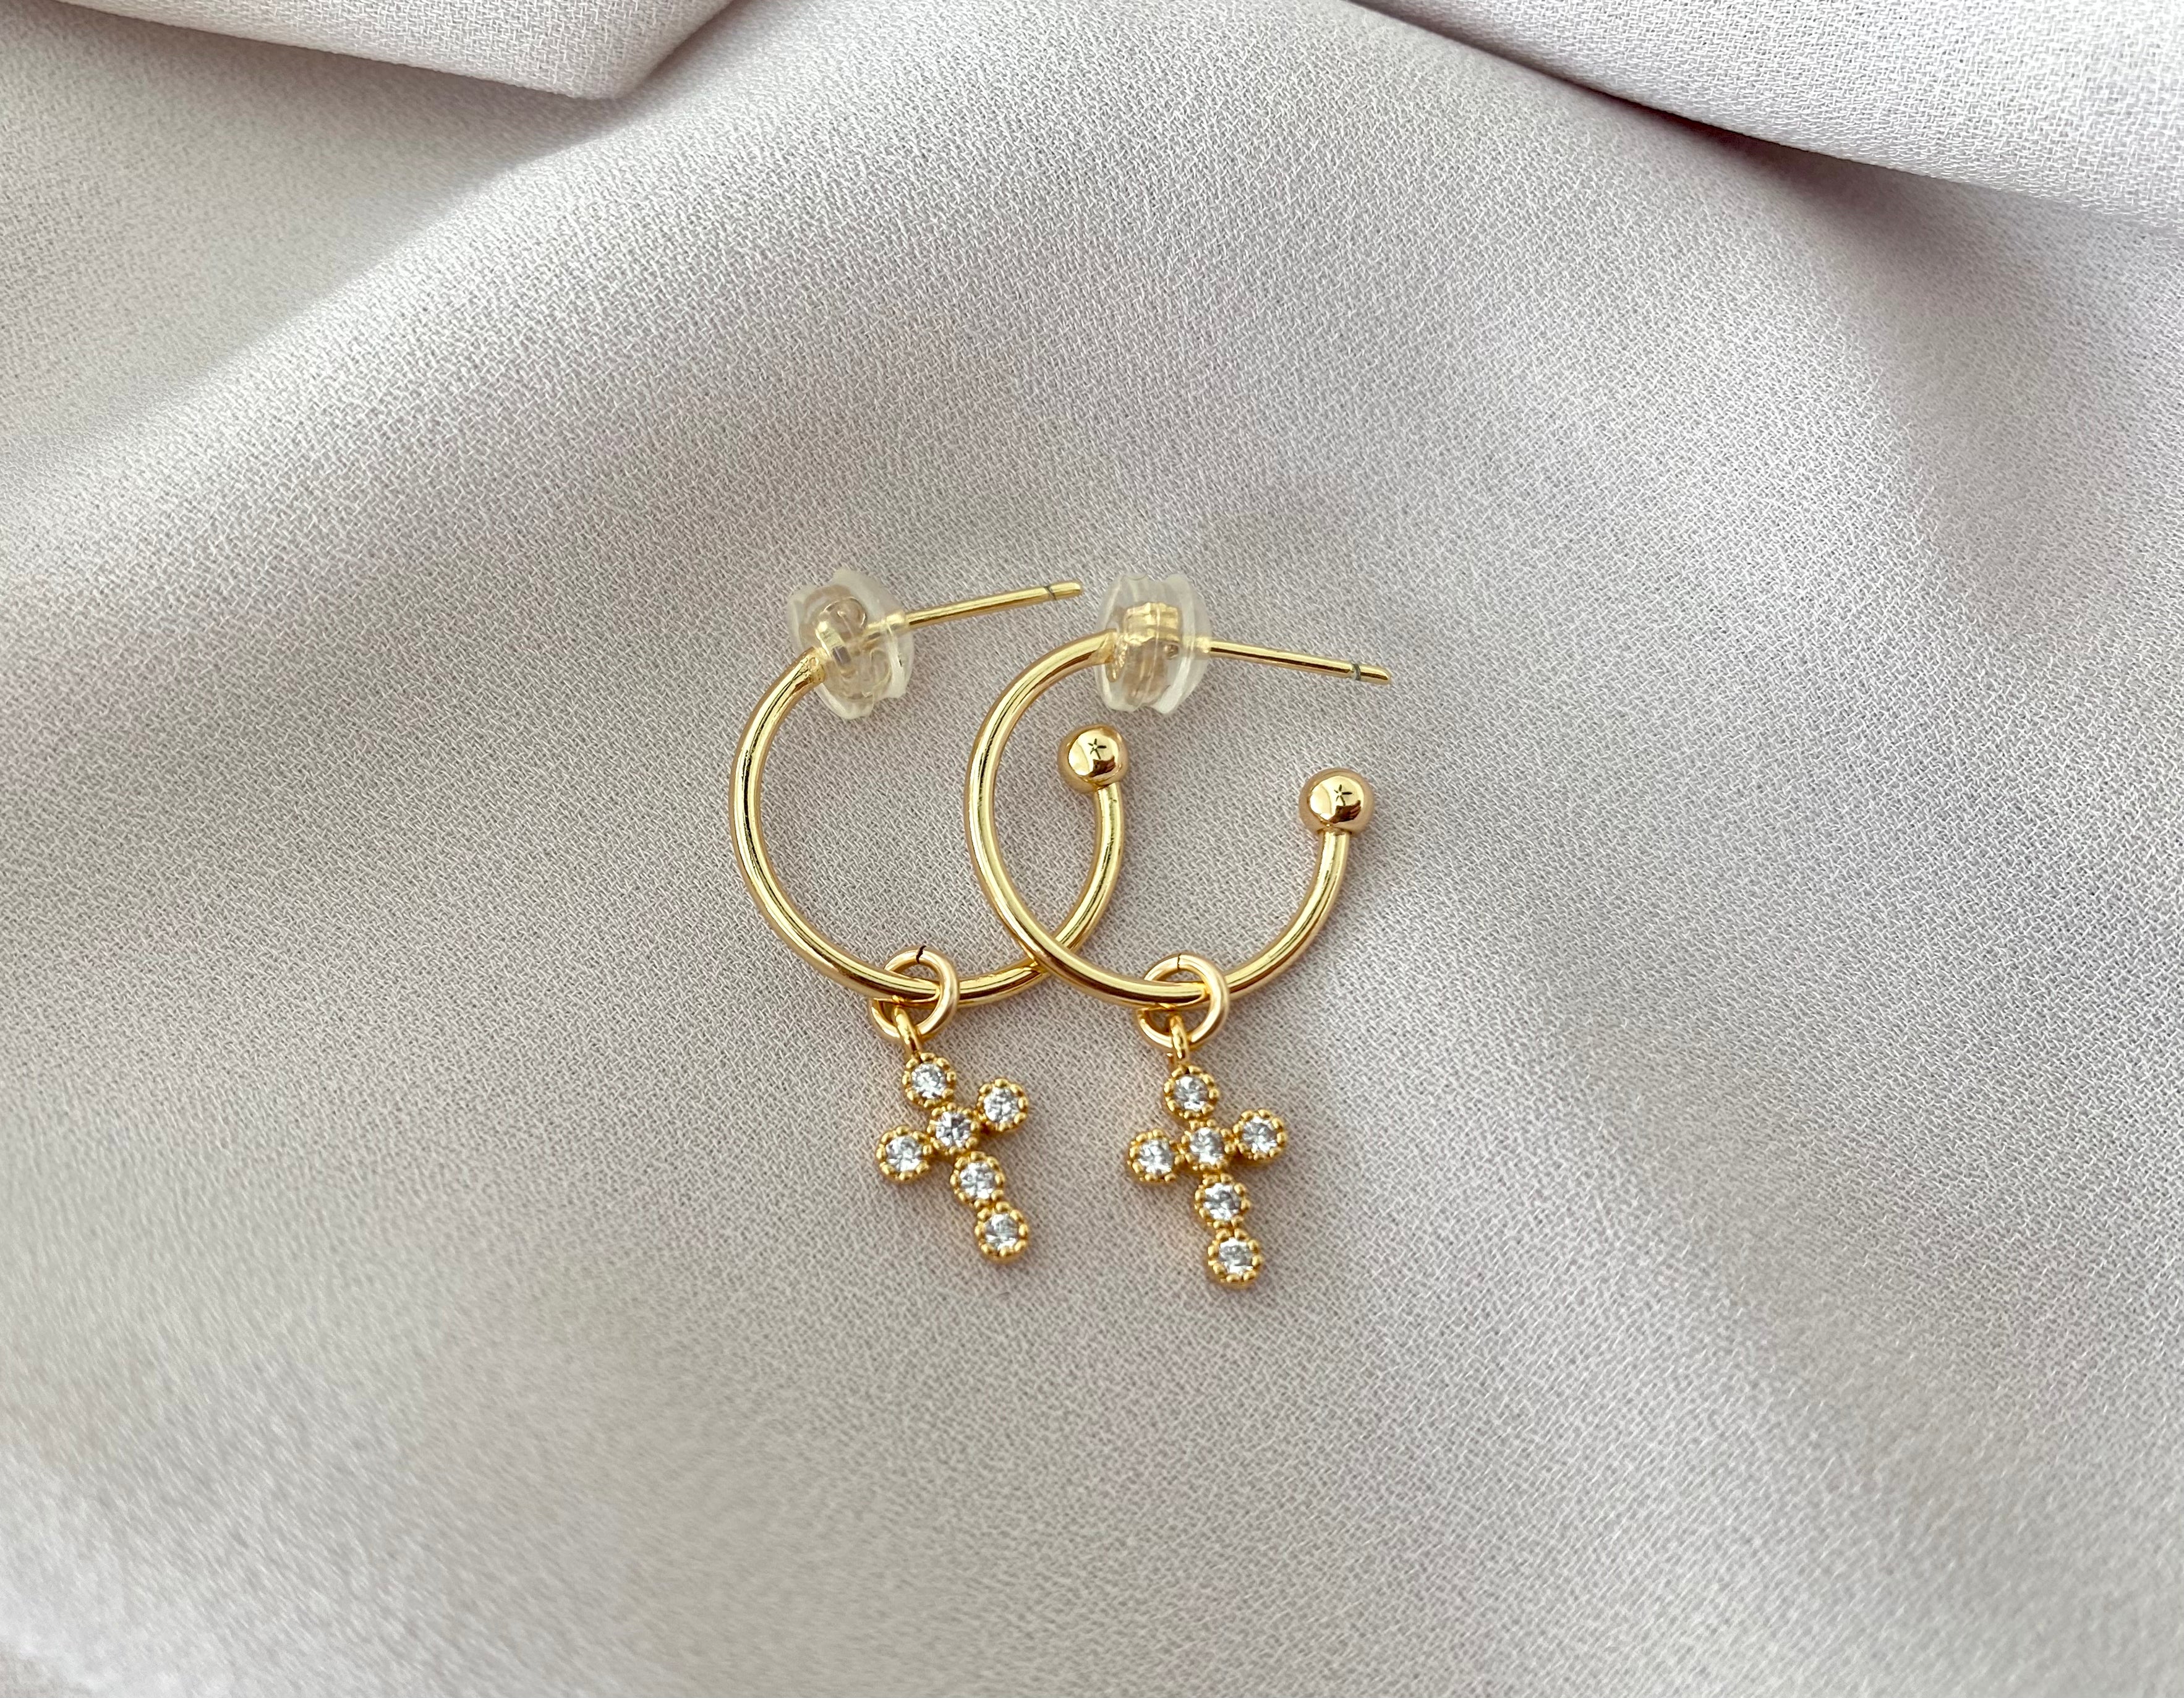 Dainty Gold Filled Cross Earrings Micro Pave Cross Hoops Minimalist Gold Hoop Earrings Cross Dangle Charm Christmas Gift Religious Jewelry